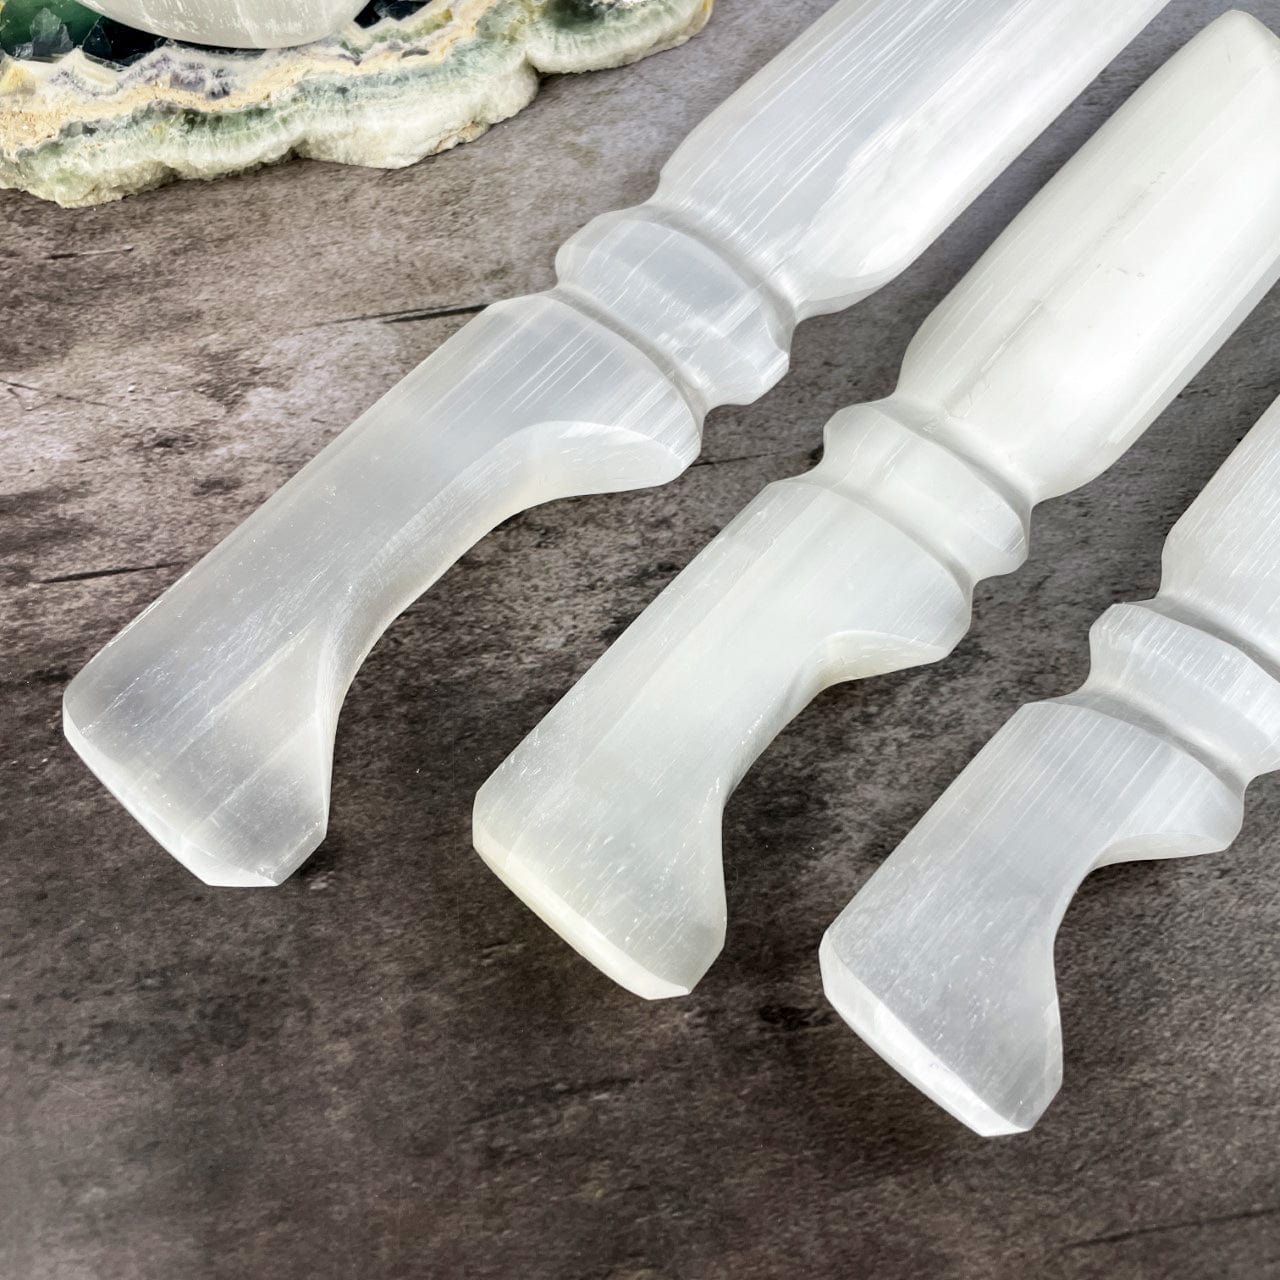 3 sizes of Selenite Knives with Hand Cut and Polished Handles up close